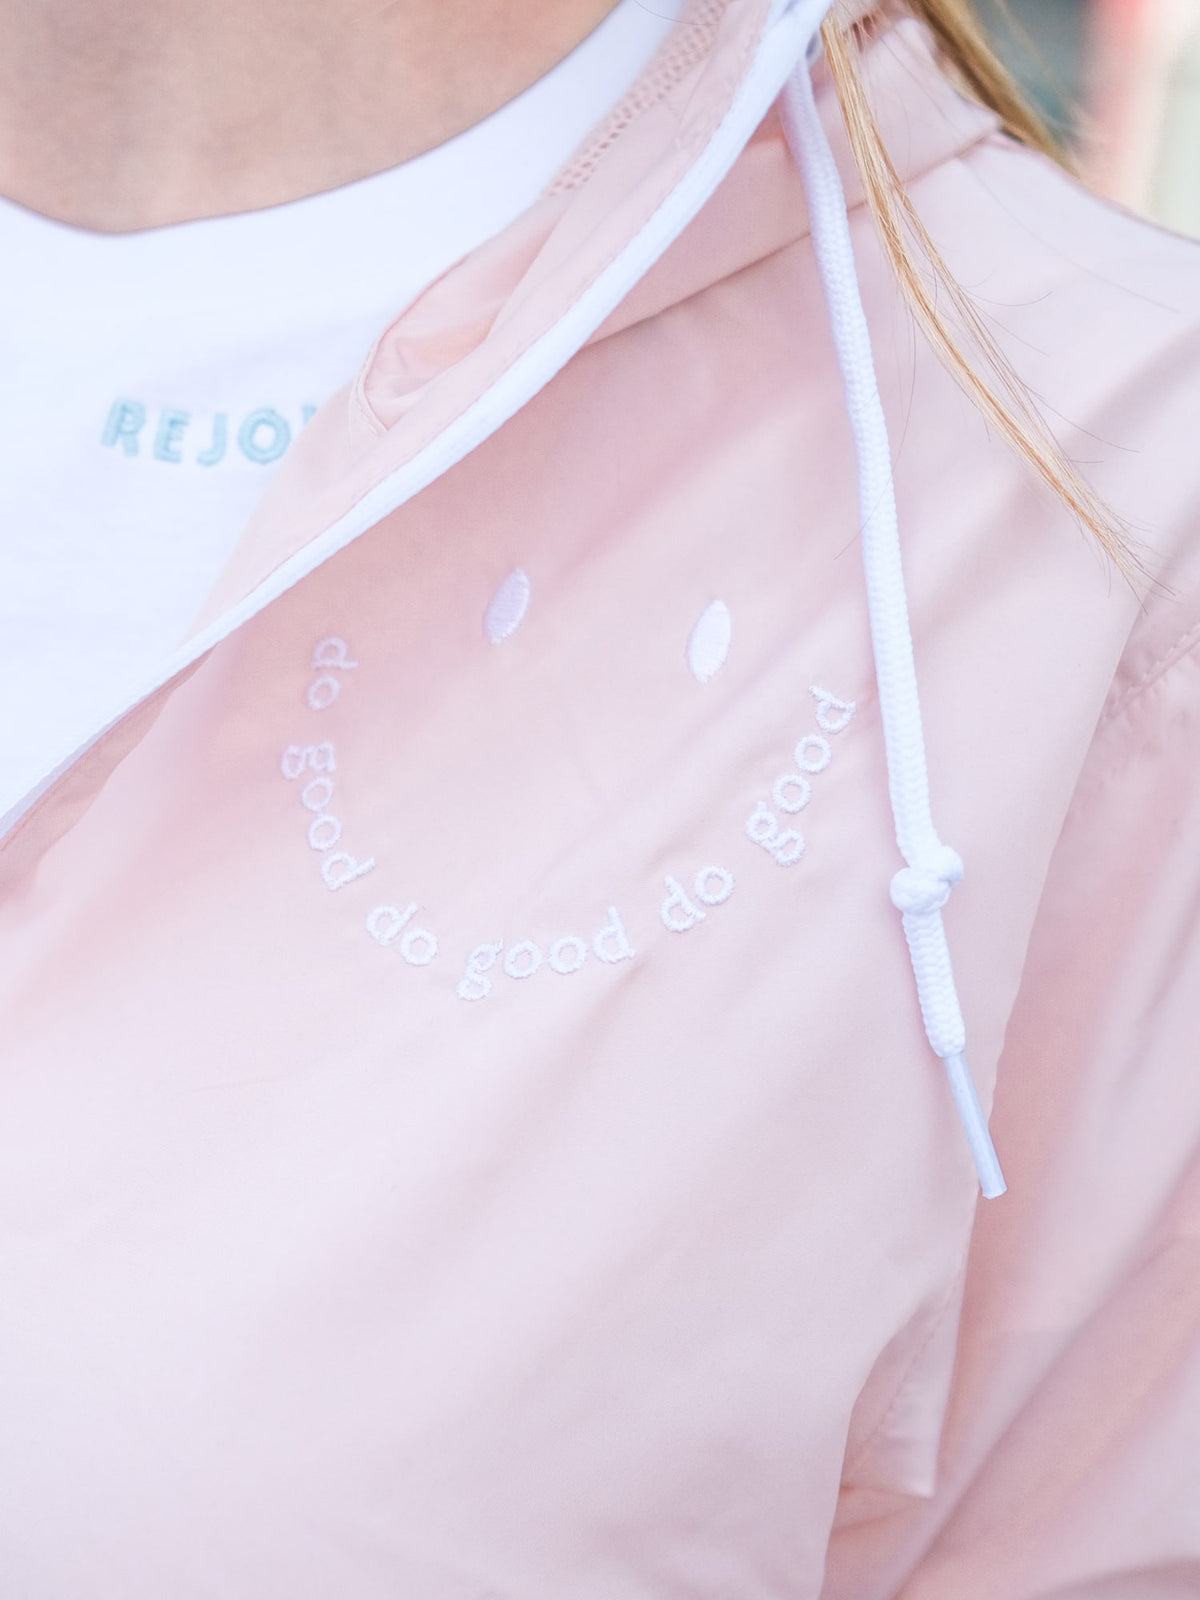 Blush Pink Windbreaker with a white zipper and a happy face embroidered on it. The happy face has the words "do good" written on it. This Christian women's jacket is based on Ecclesiastes 3:12 and our brand name Rejoice & Do Good